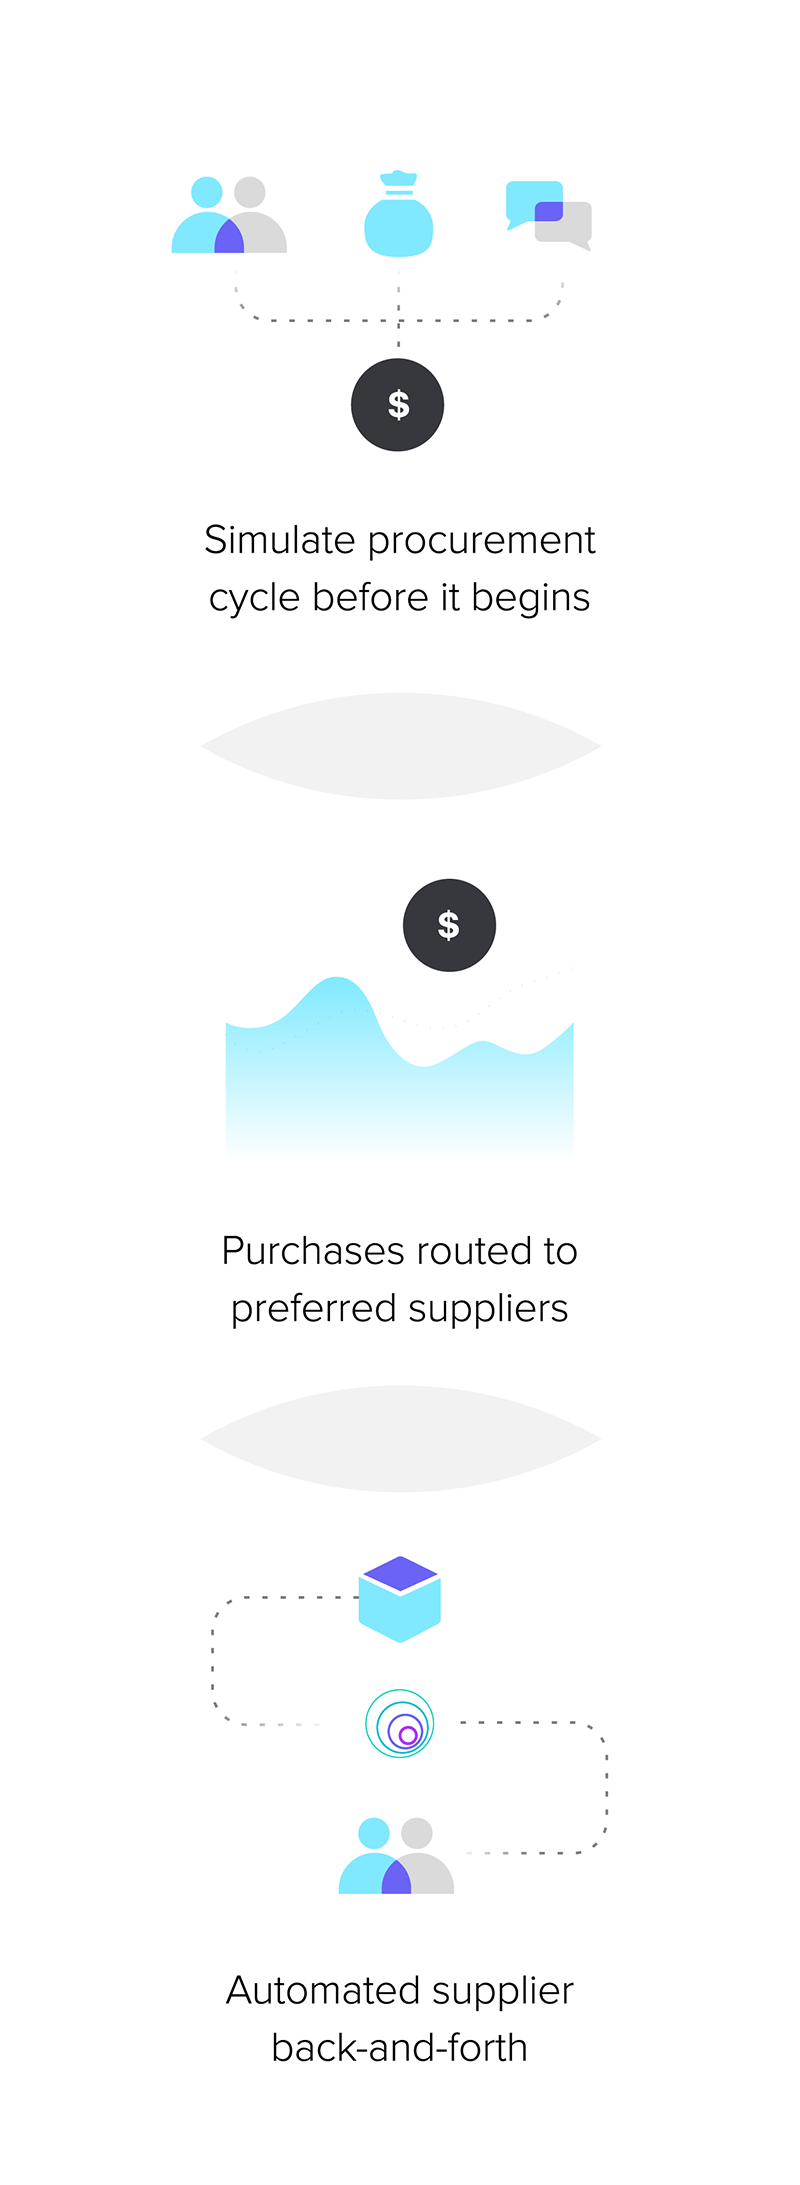 Simulate procurement cycle before it begins. Purchases routed to preferred suppliers. Automated supplier back-and-forth.